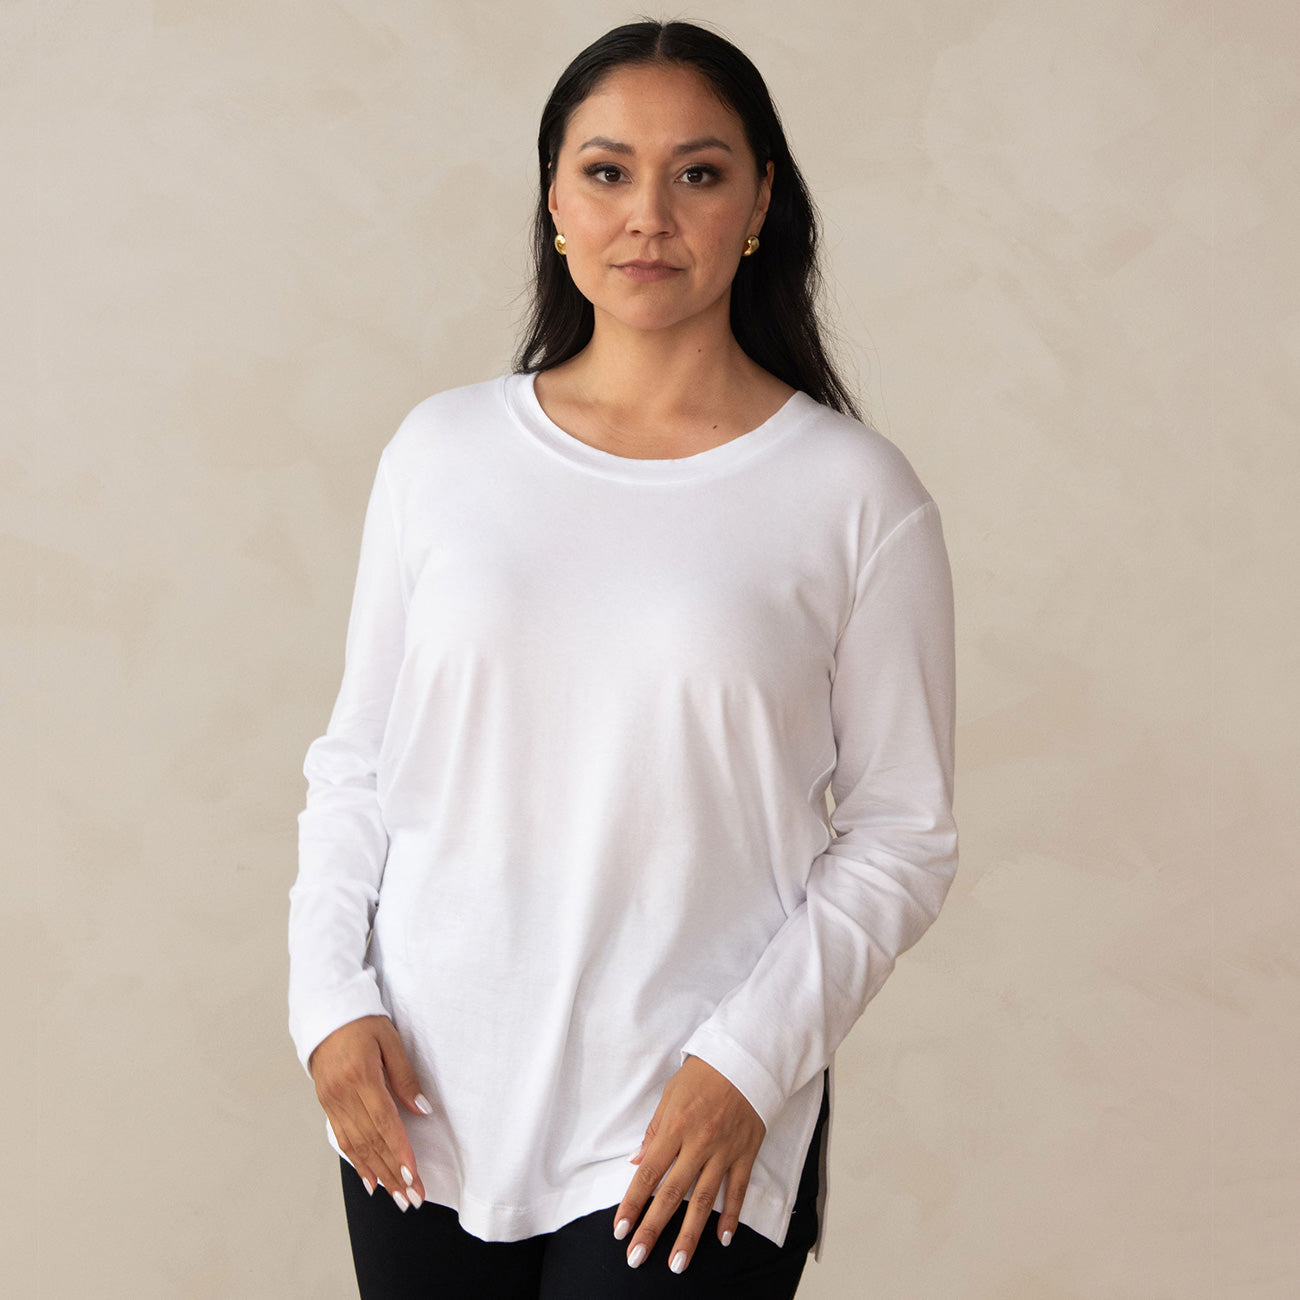 woman wearing a long sleeve scoop neck white top